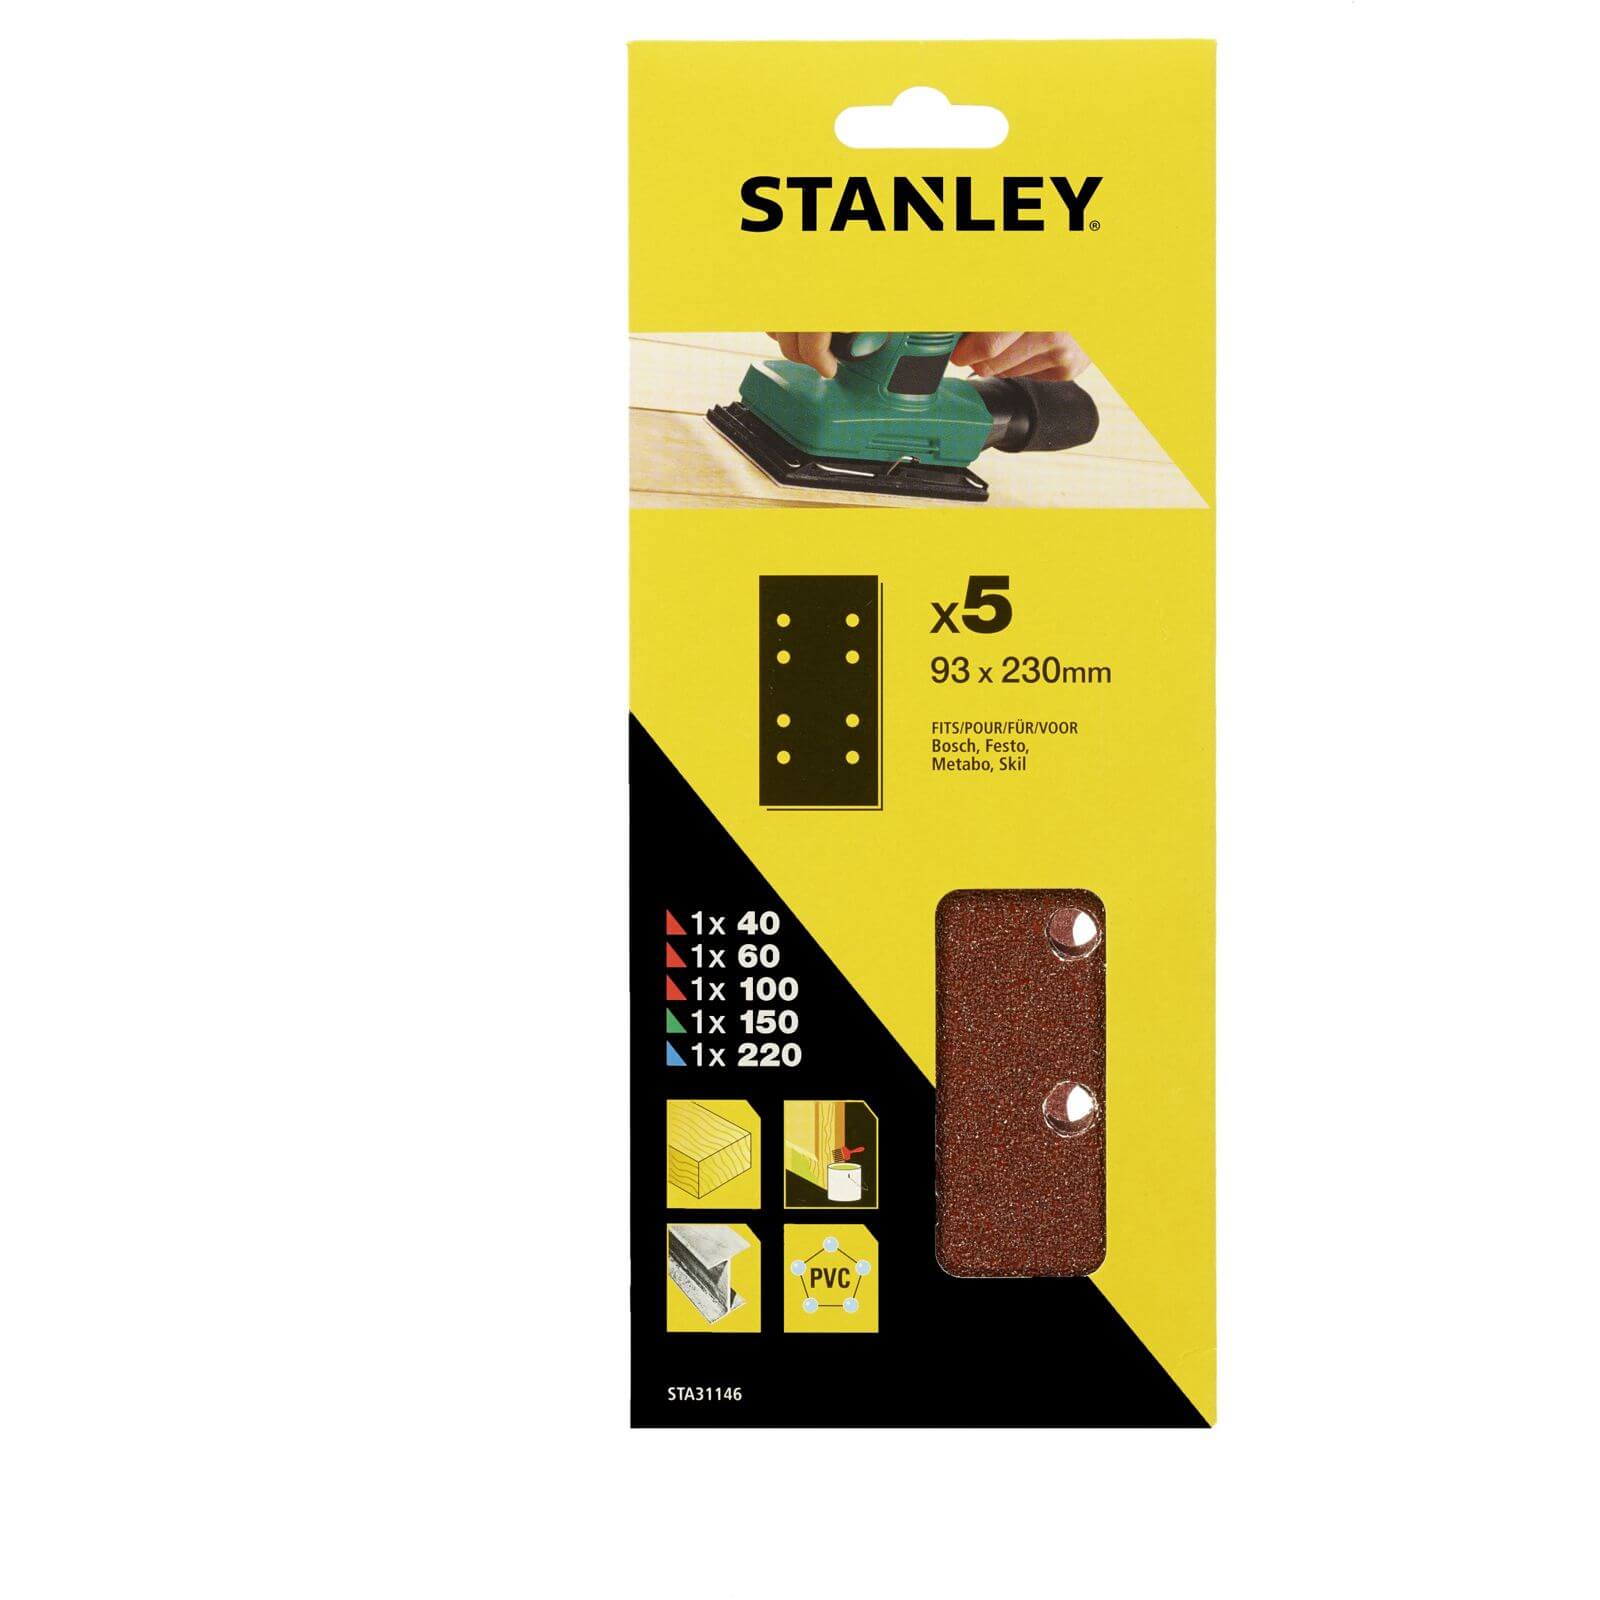 Photo of Stanley 1/3 Sheet Sander Mixed Wire Clip Sanding Sheets